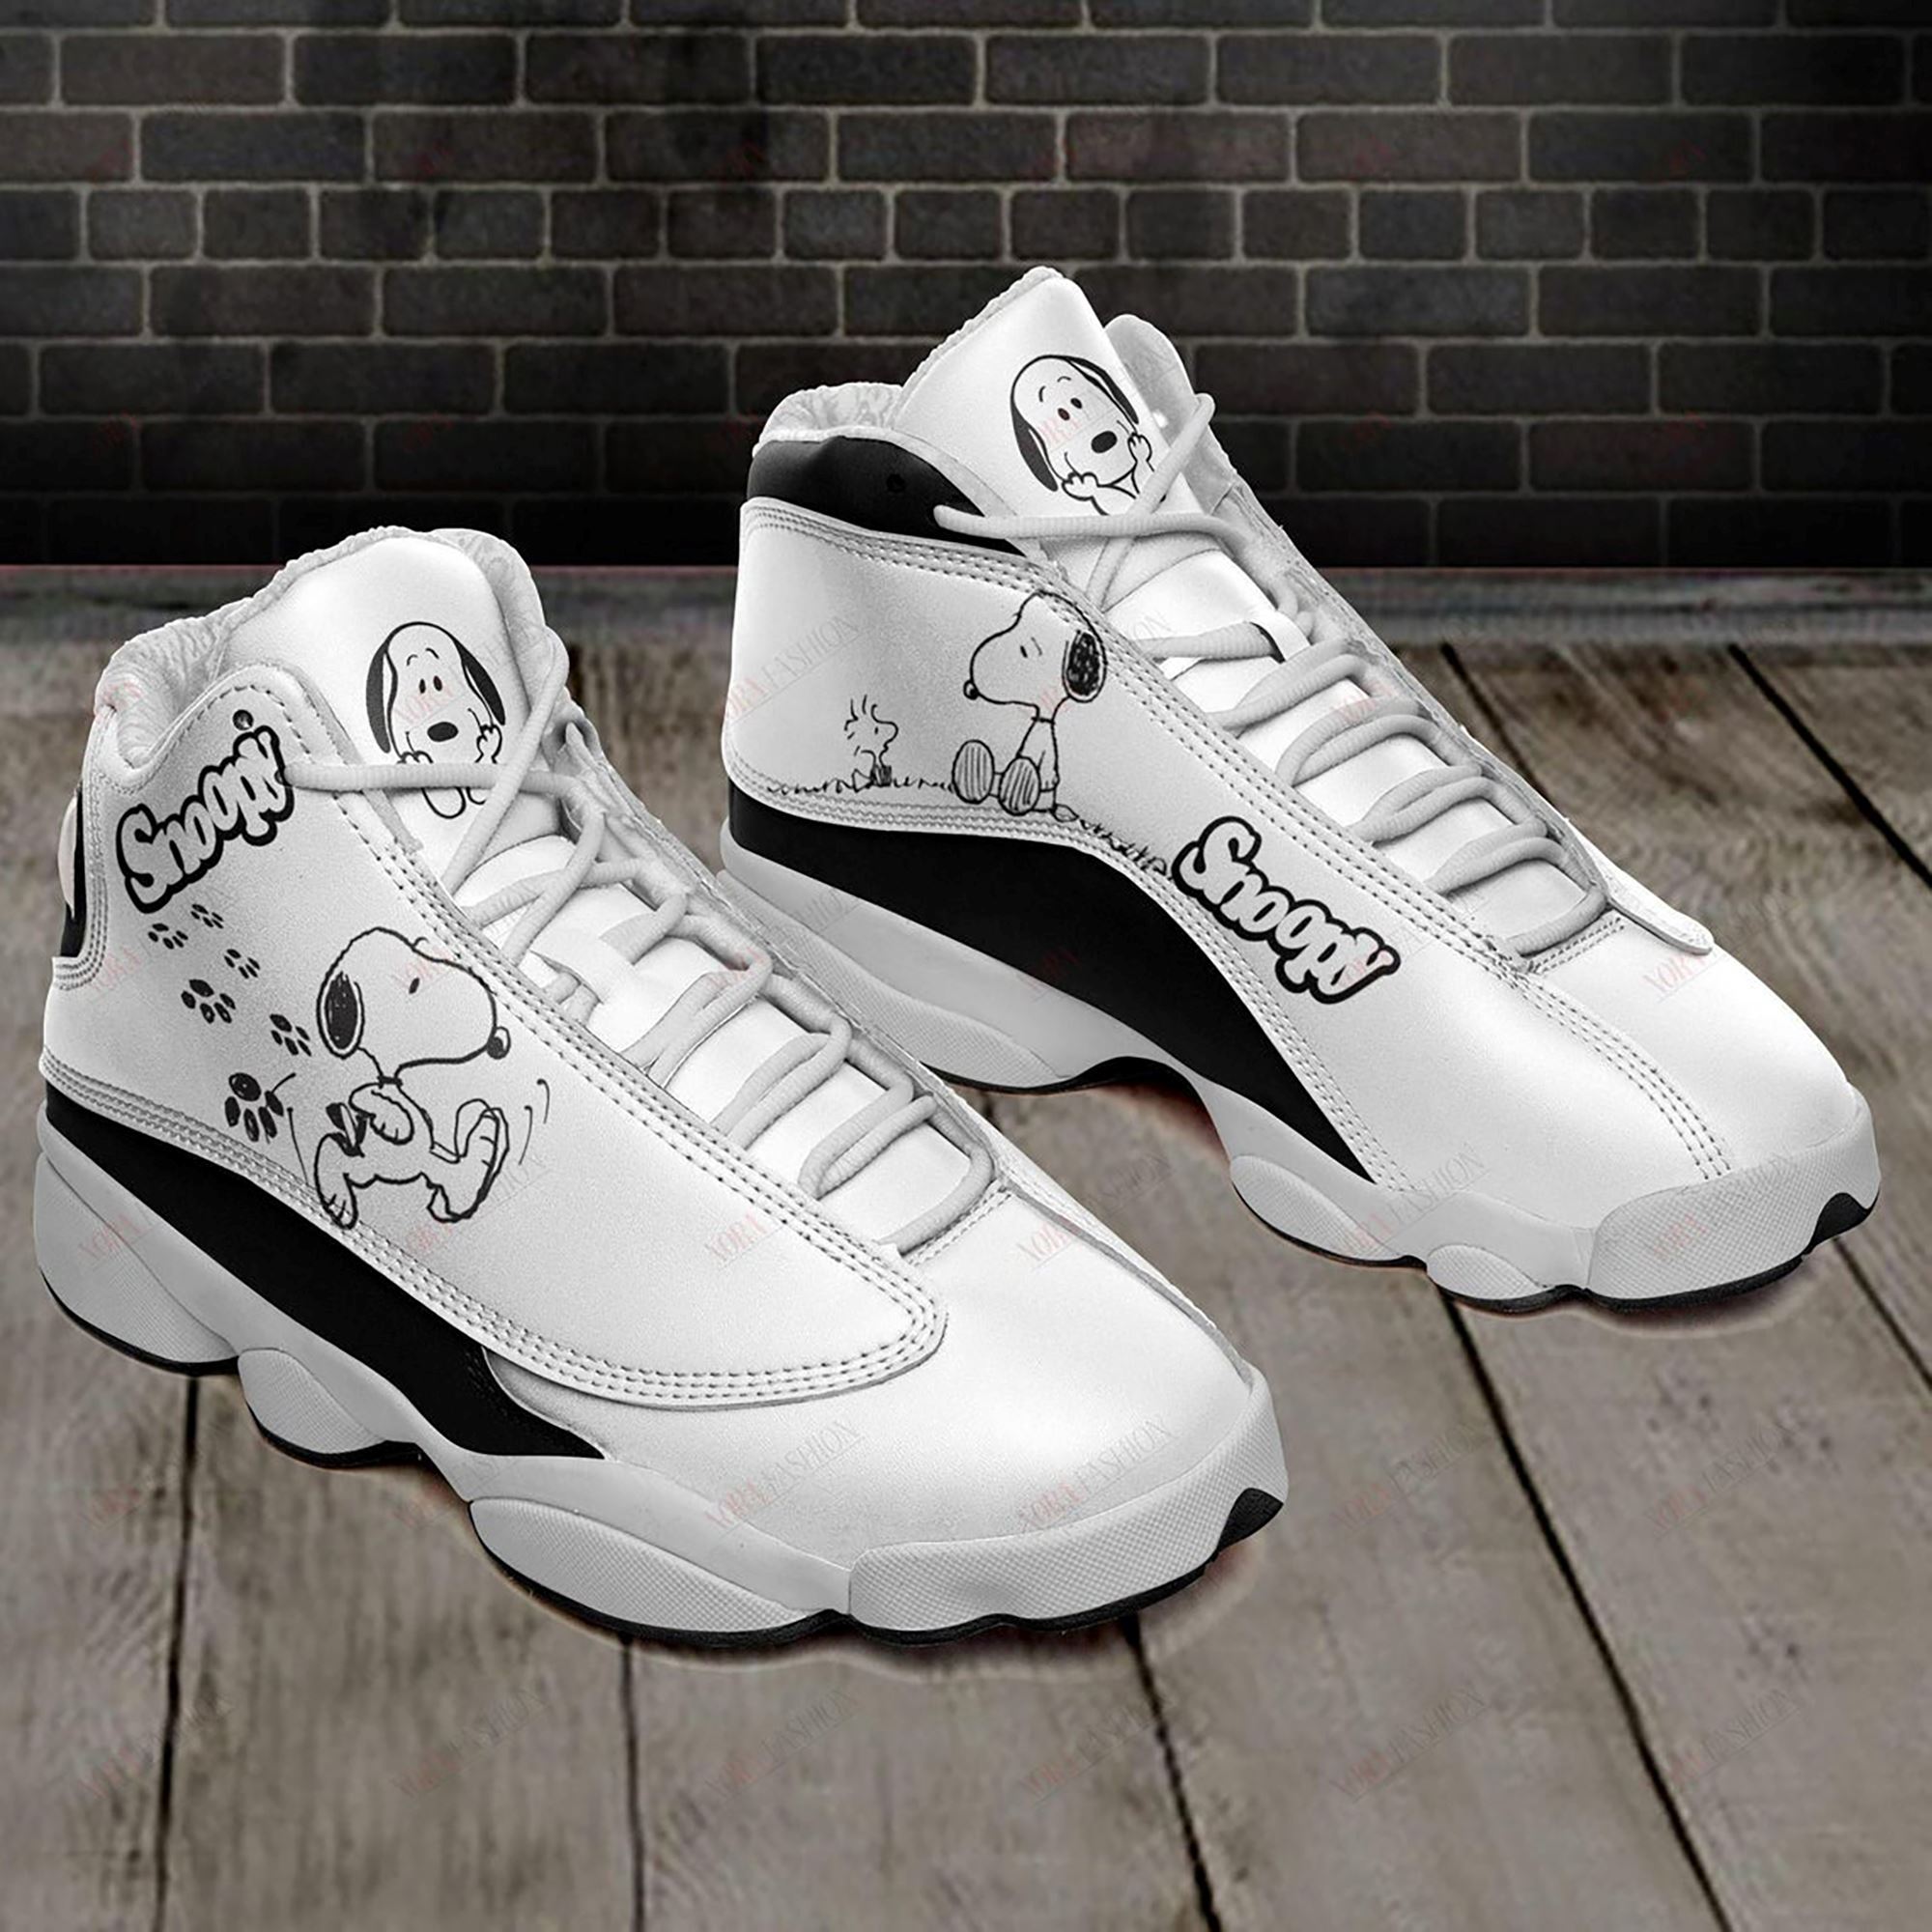 Snoopy Air Jordan 13 Shoes Snoopy Leather Shoes Snoopy Sport Shoes Shoes For Snoopy Lover Gift For Men And Women